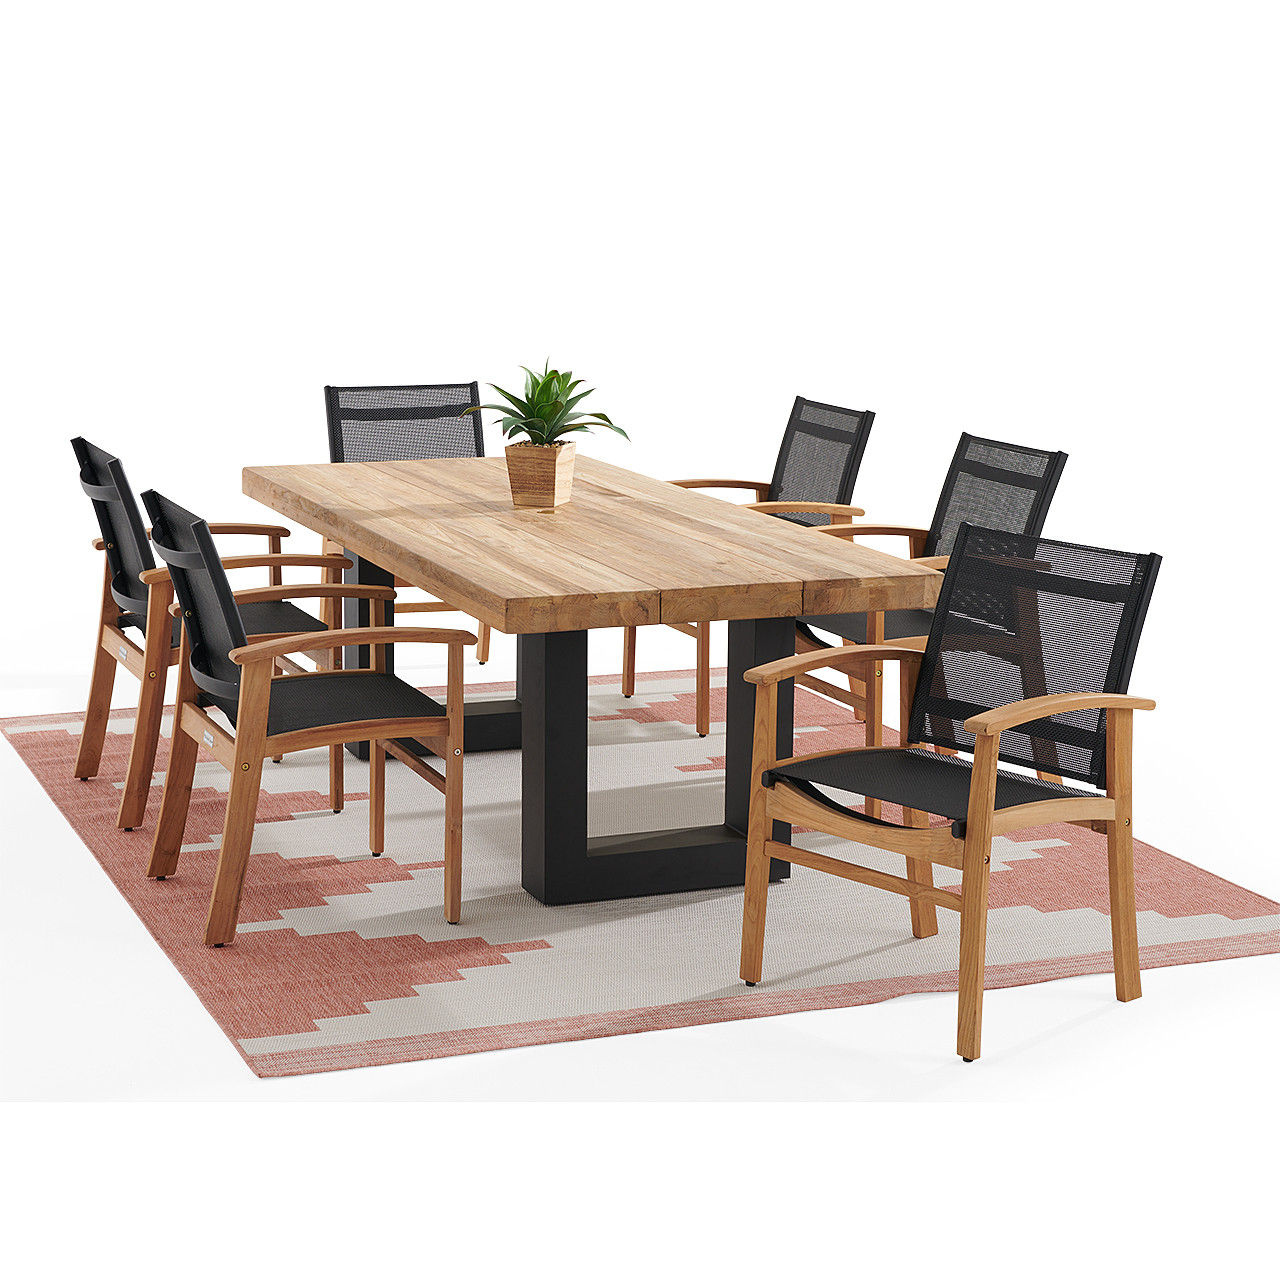 Sedona Teak with Black Sling 7 Piece Dining Set with 84 x 40 in. Table